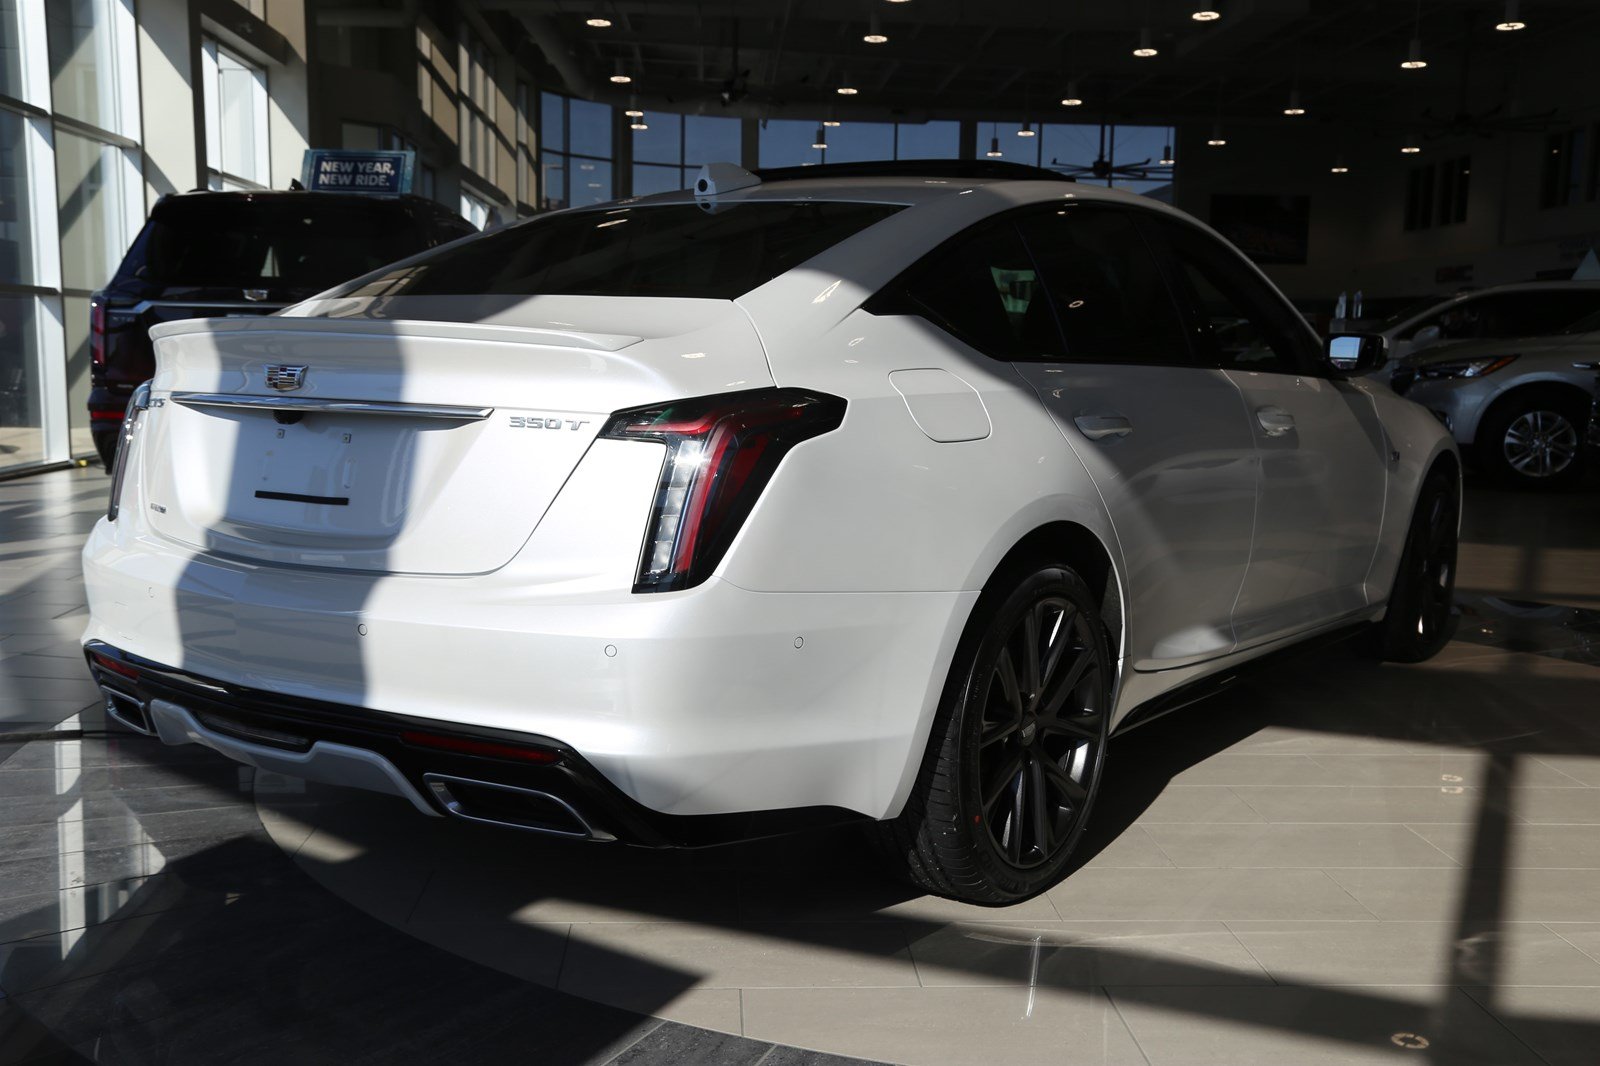 44 Top Photos 2020 Cadillac Ct5 Sport Price : Cadillac CT5: Photos, Release Date, Specifications, And ...